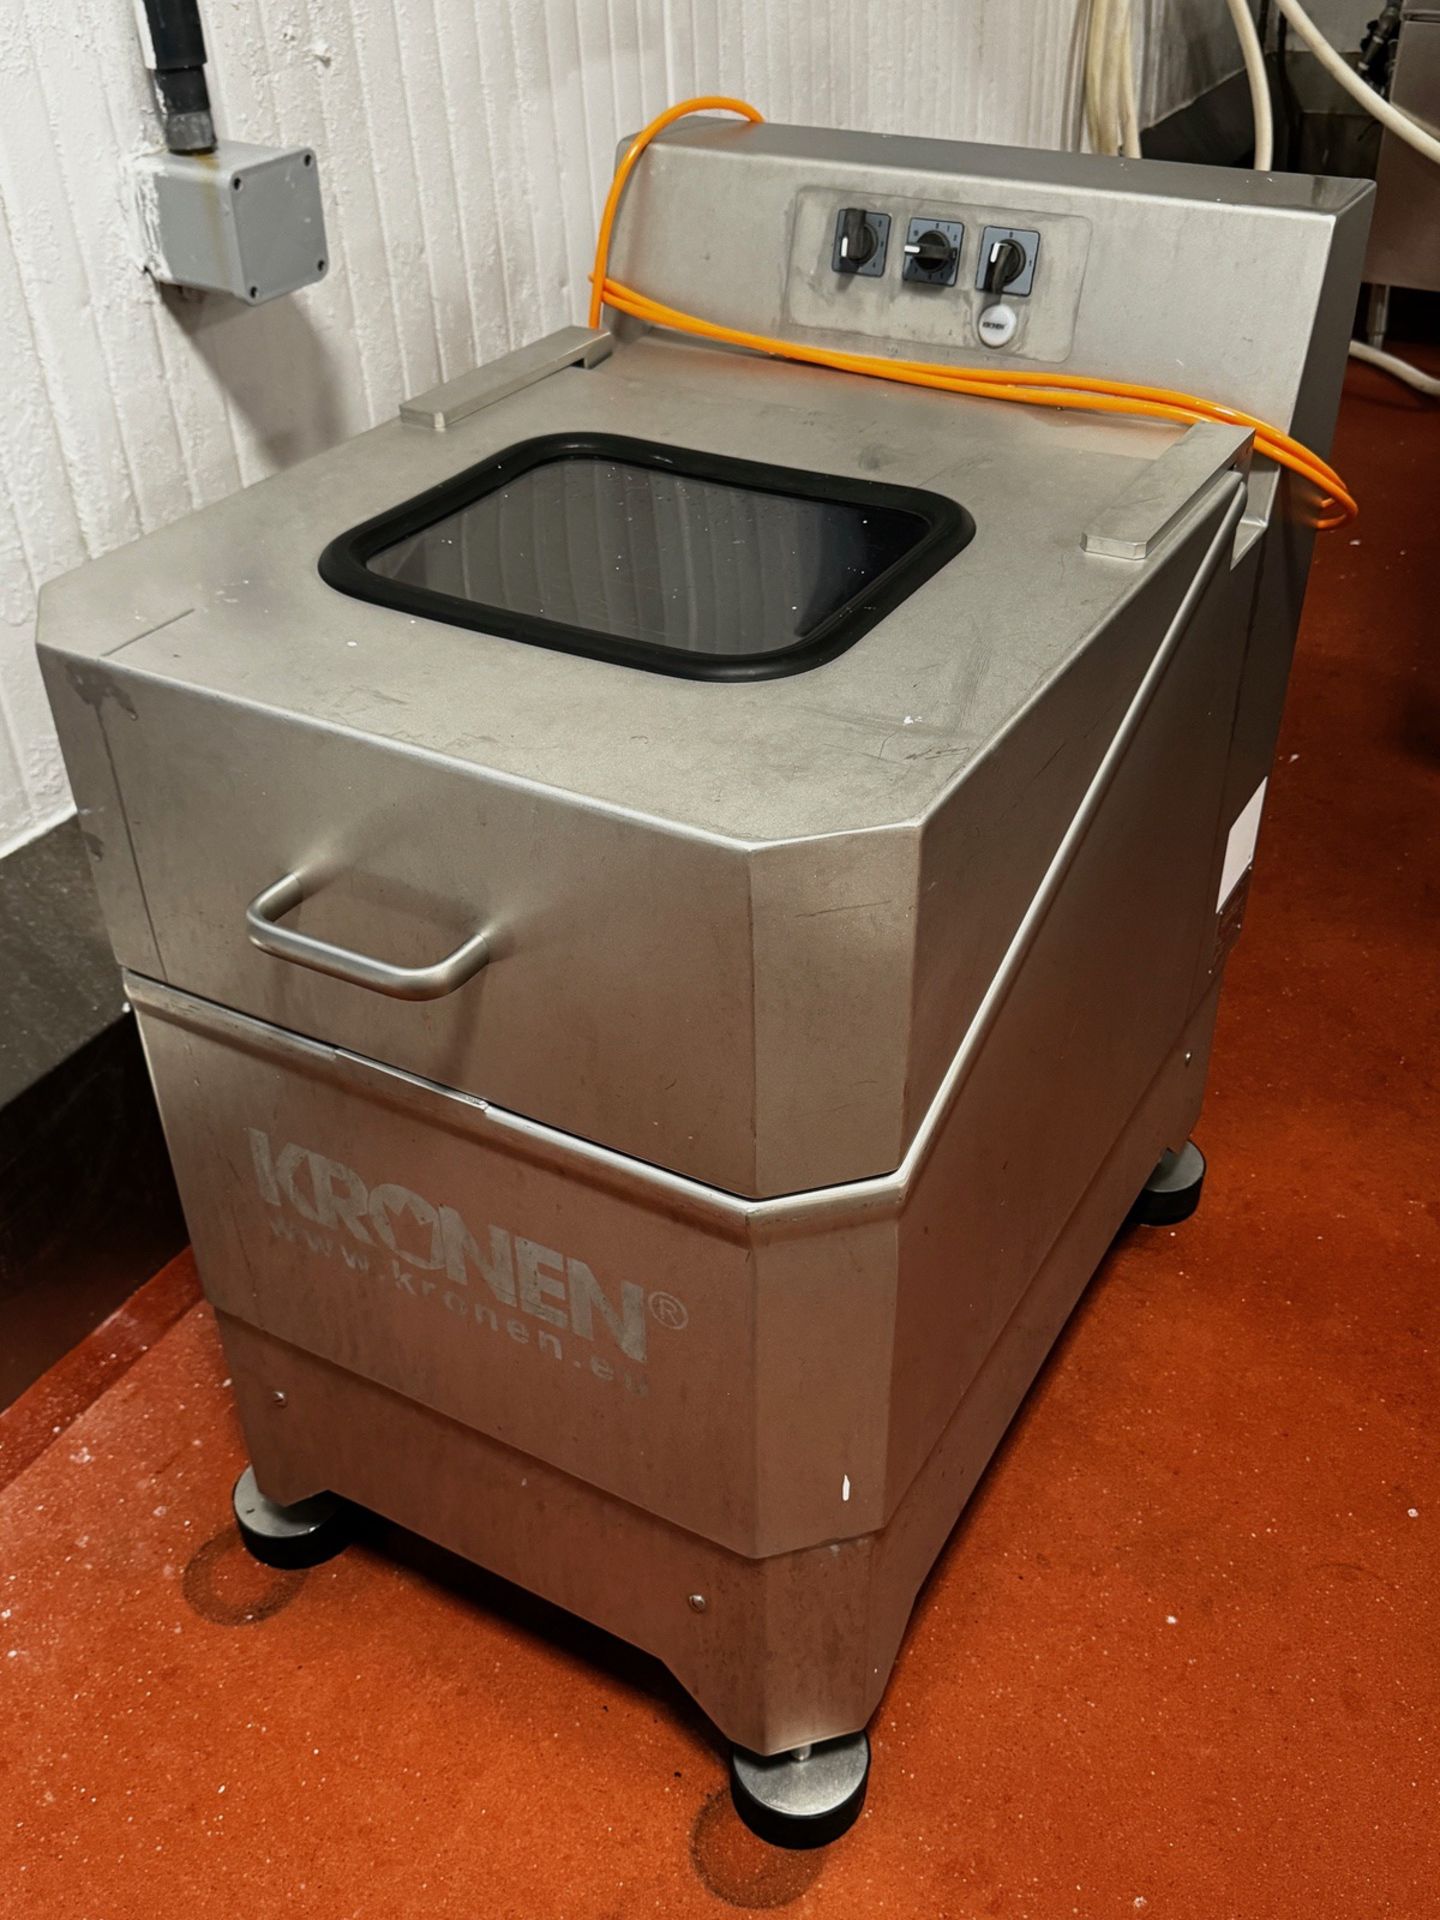 Kronen Stainless Steel Spin Dryer with Baskets | Rig Fee $150